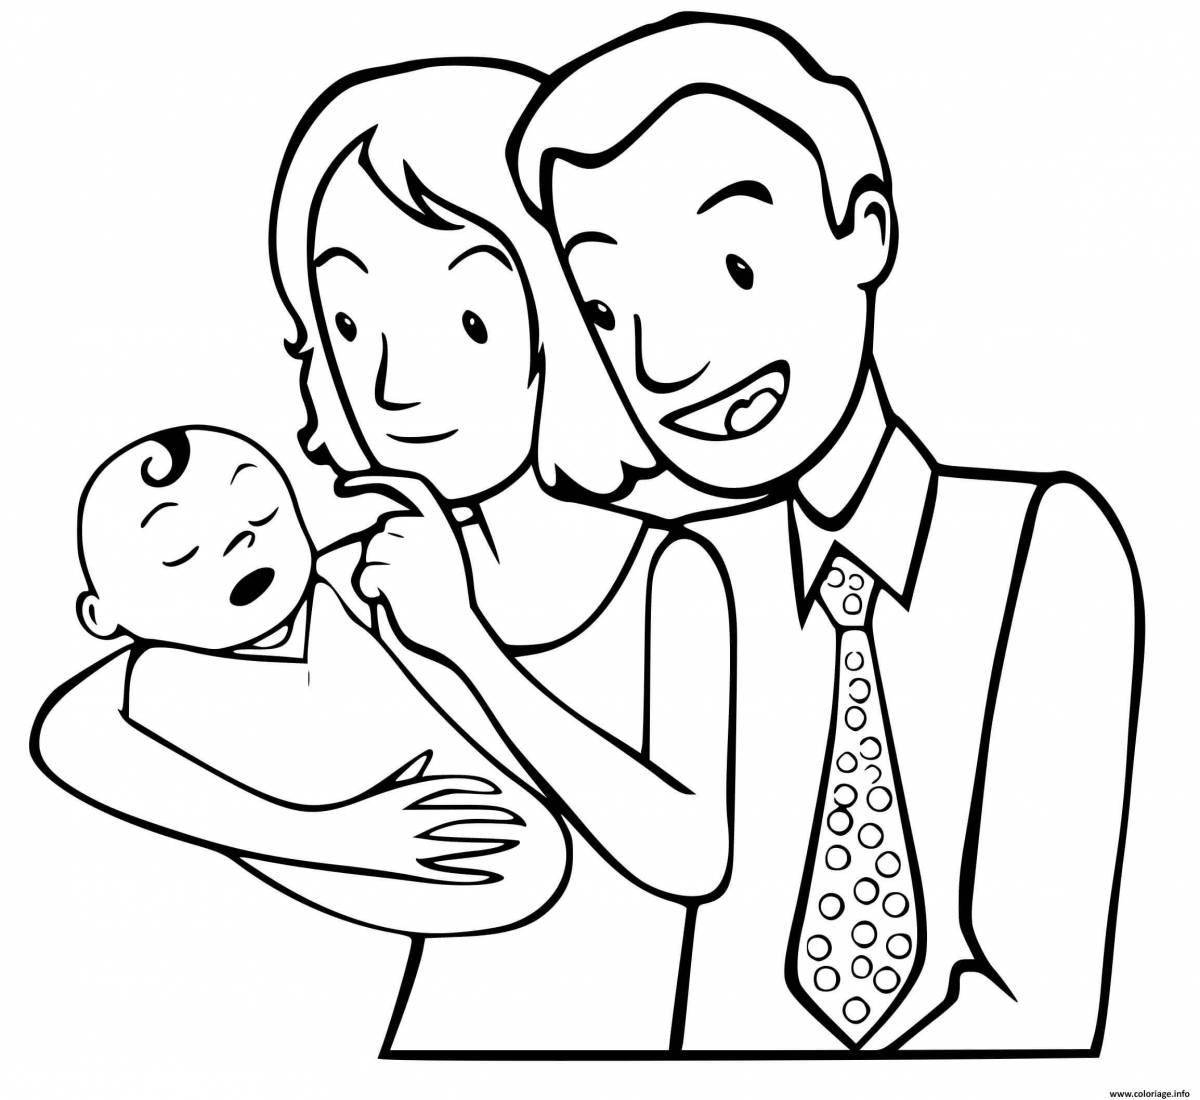 Serene mom and dad coloring book for kids